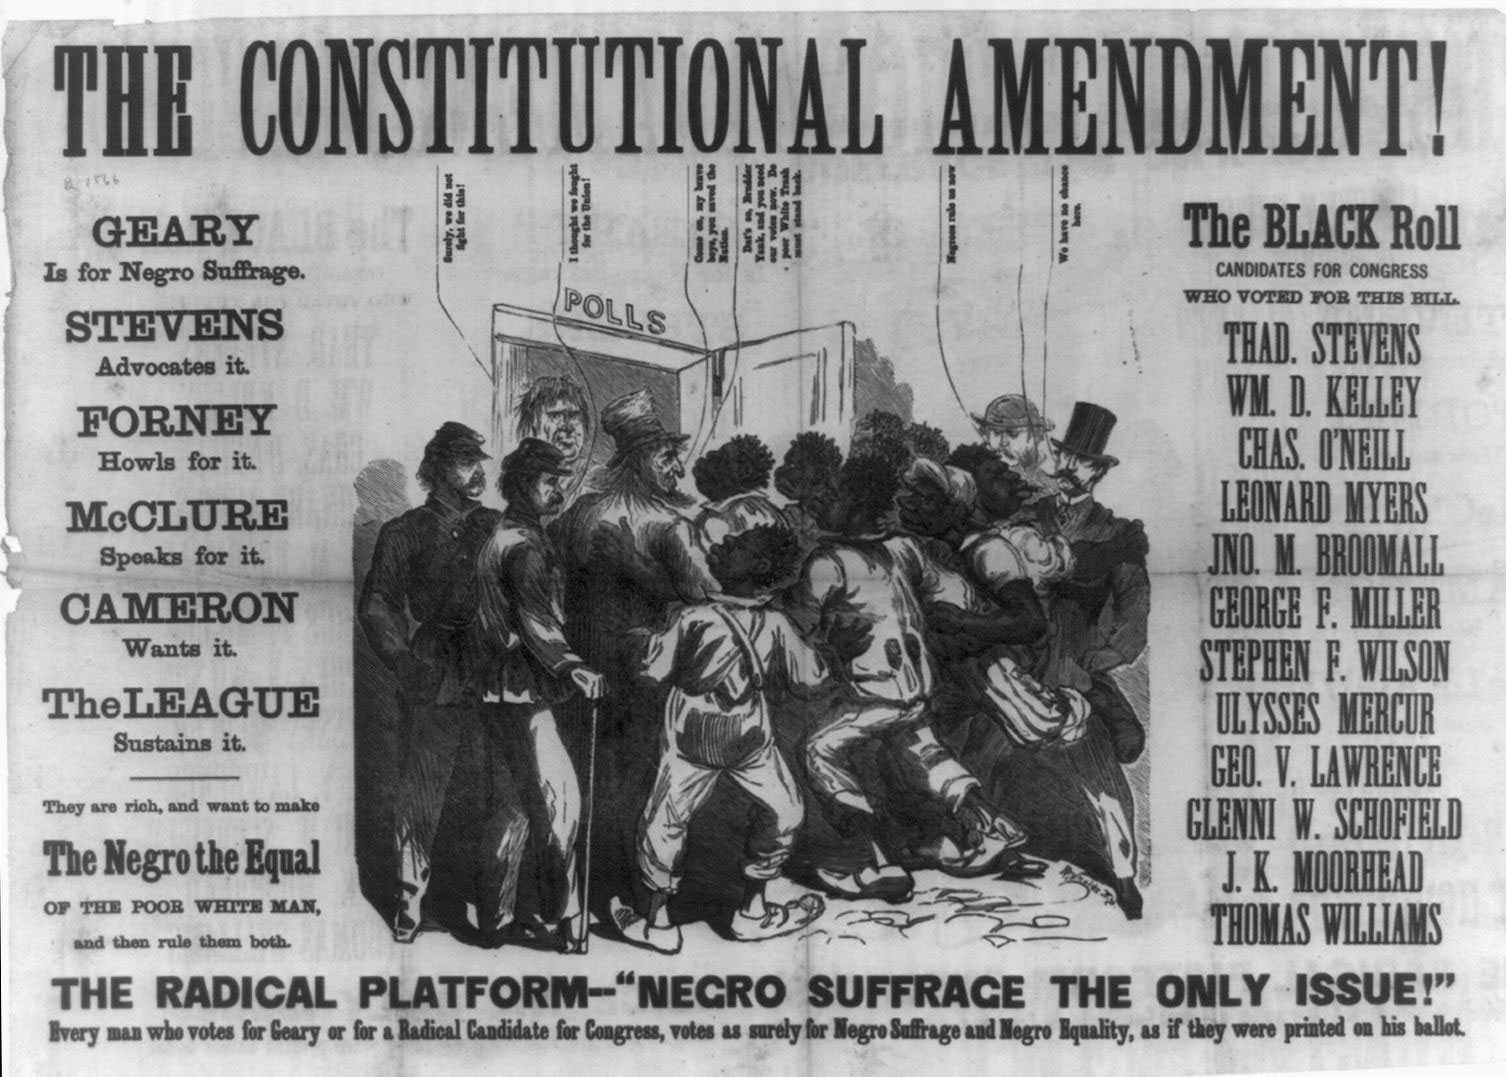 An ad with the headline "The Constitutional Amendment!", with an image of people voting at the polls.